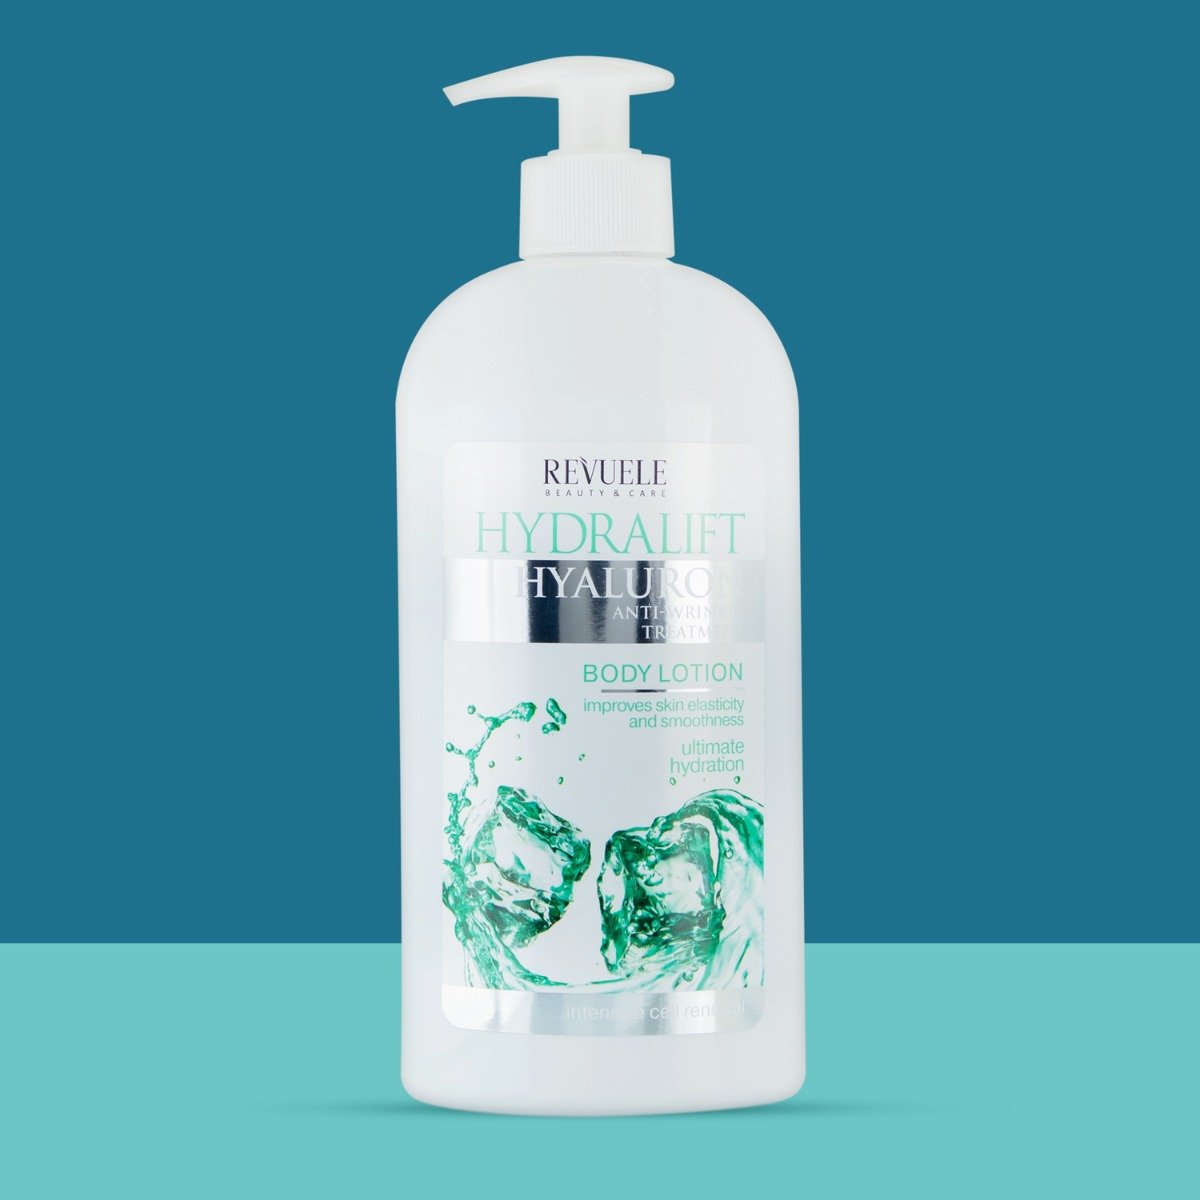 Revuele Hydralift Hyaluron Moisturizing Body Lotion With Ultimate Hydration